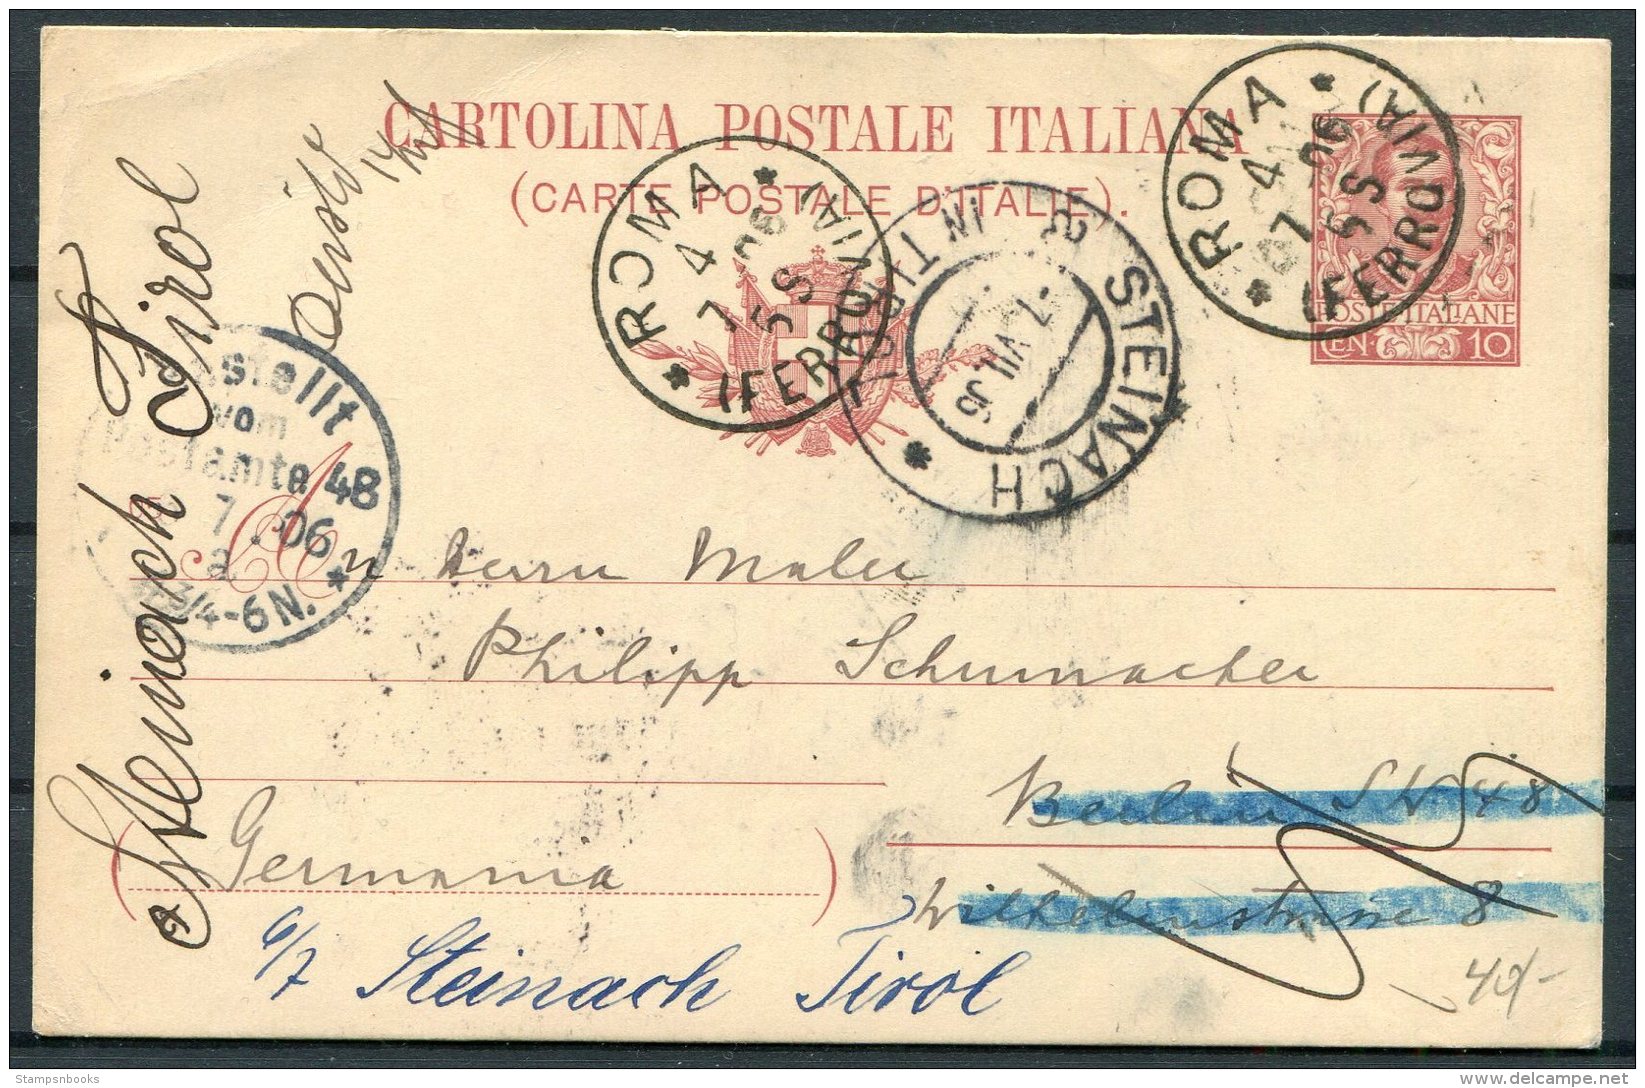 1906 Italy Stationey Postcard. Carte Postale Roma - Berlin Redirected Steinach, Tirol - Stamped Stationery